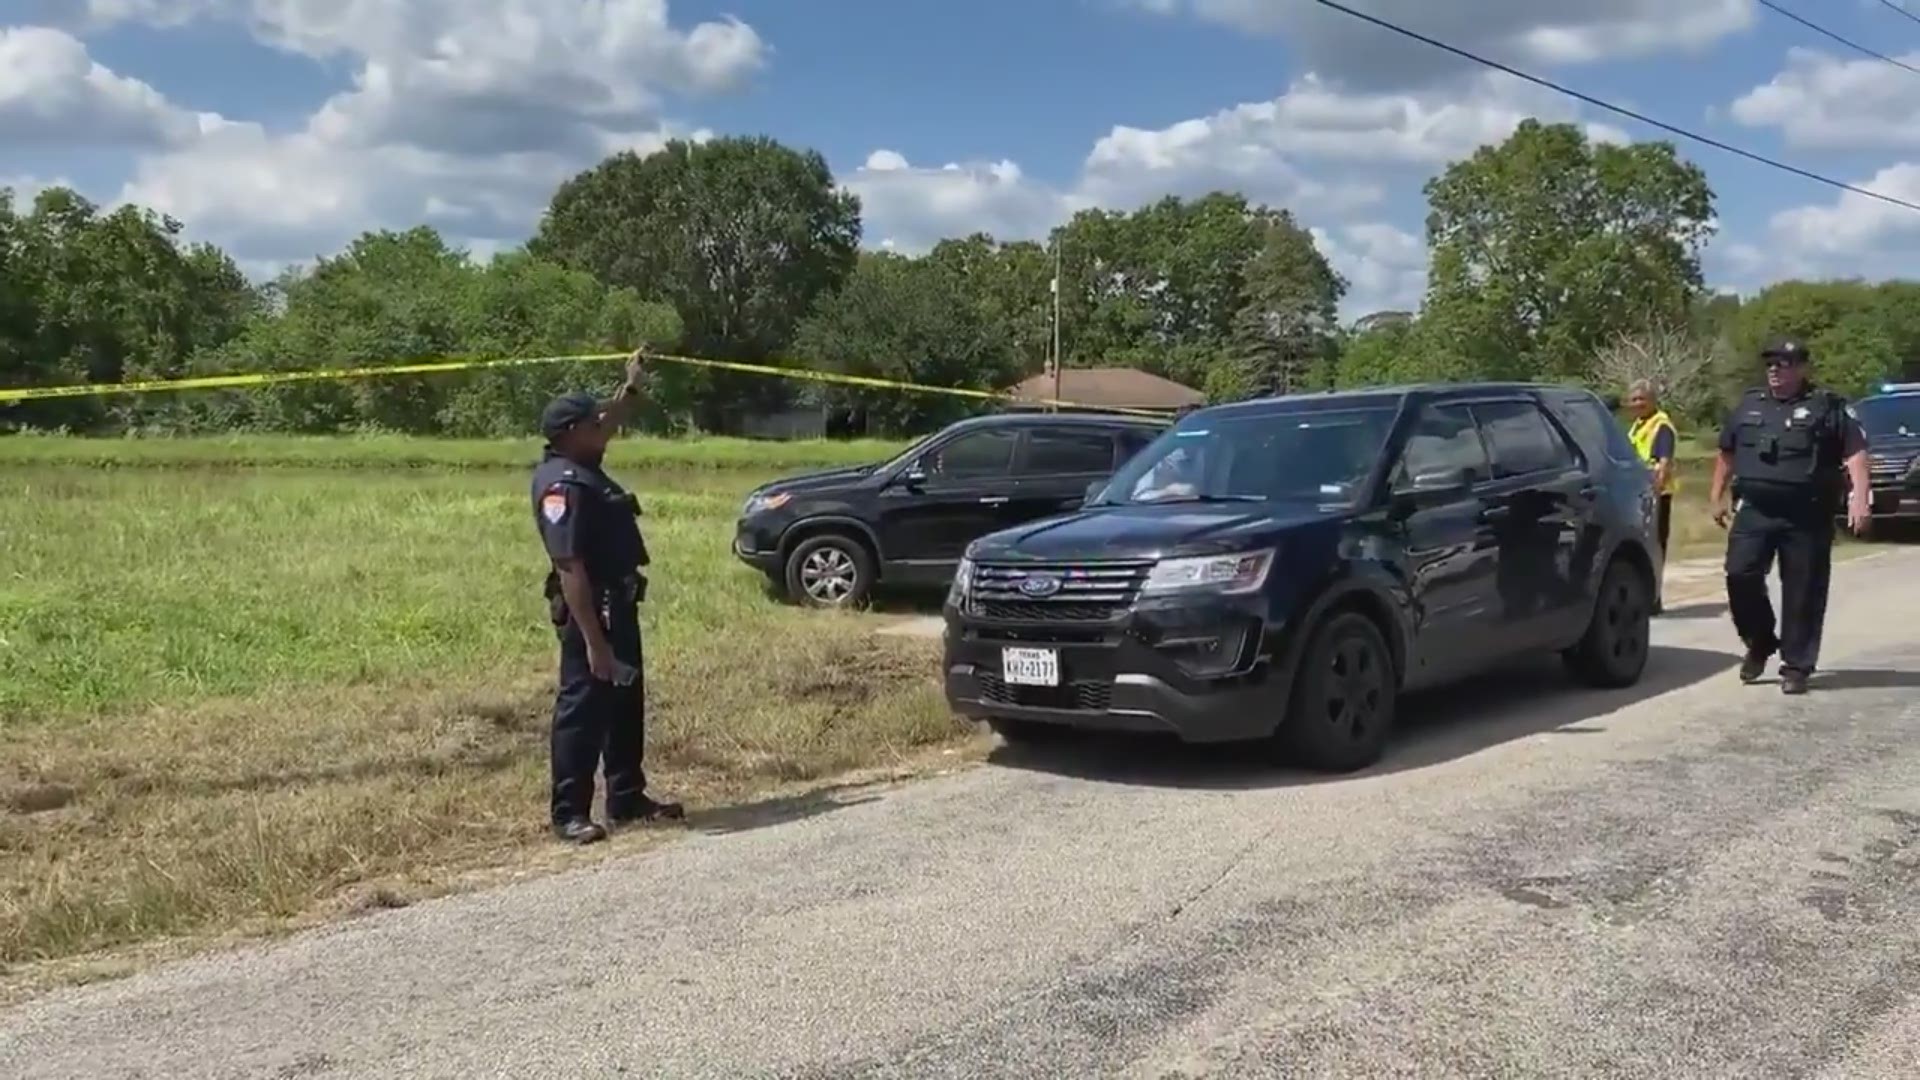 A woman's body was found in a canal in west Jefferson County. When asked if it could b flood related, the sheriff's office said "it very well could be."